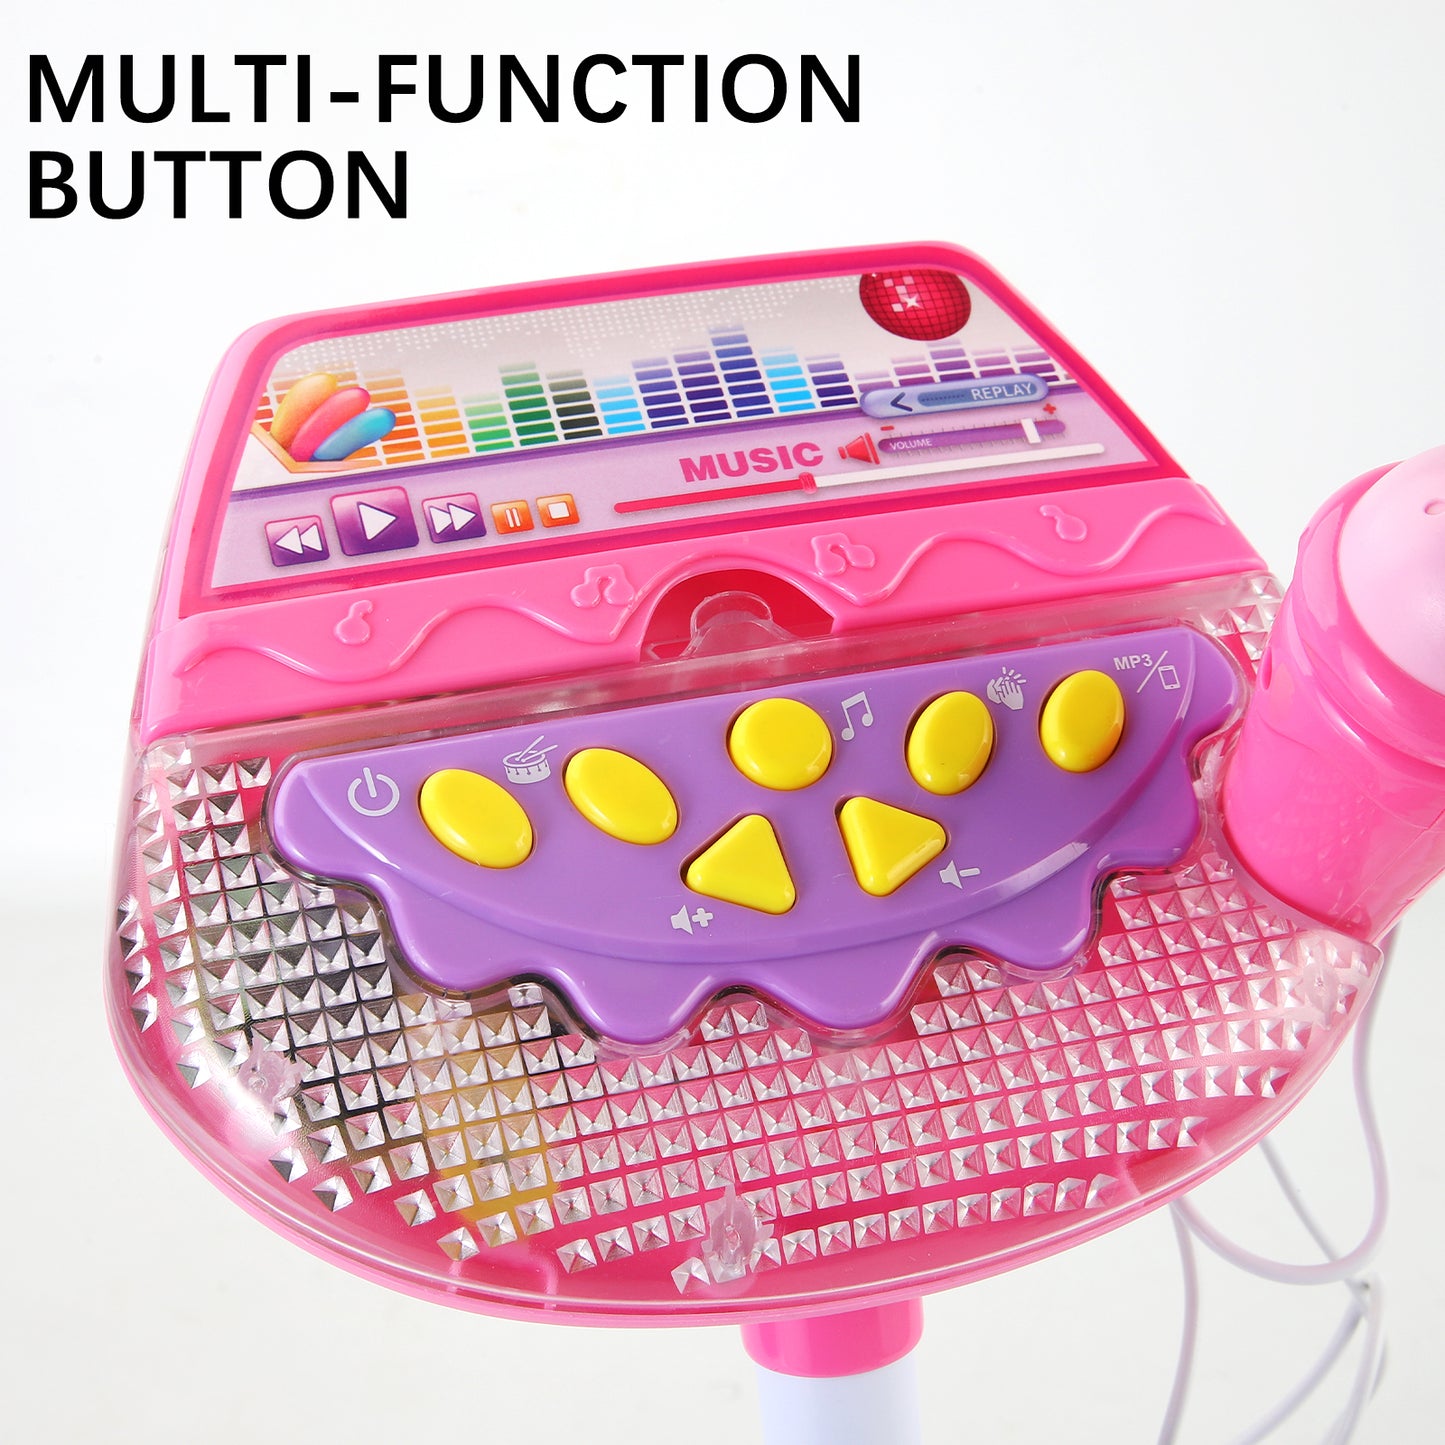 AOQIMITENJOY Musical Instrument Electronic Vertical Microphone Toys with Panel LED Lighting Children's Toys Birthday Gifts for Boys and Girls 3 Year Old+ HK-6011